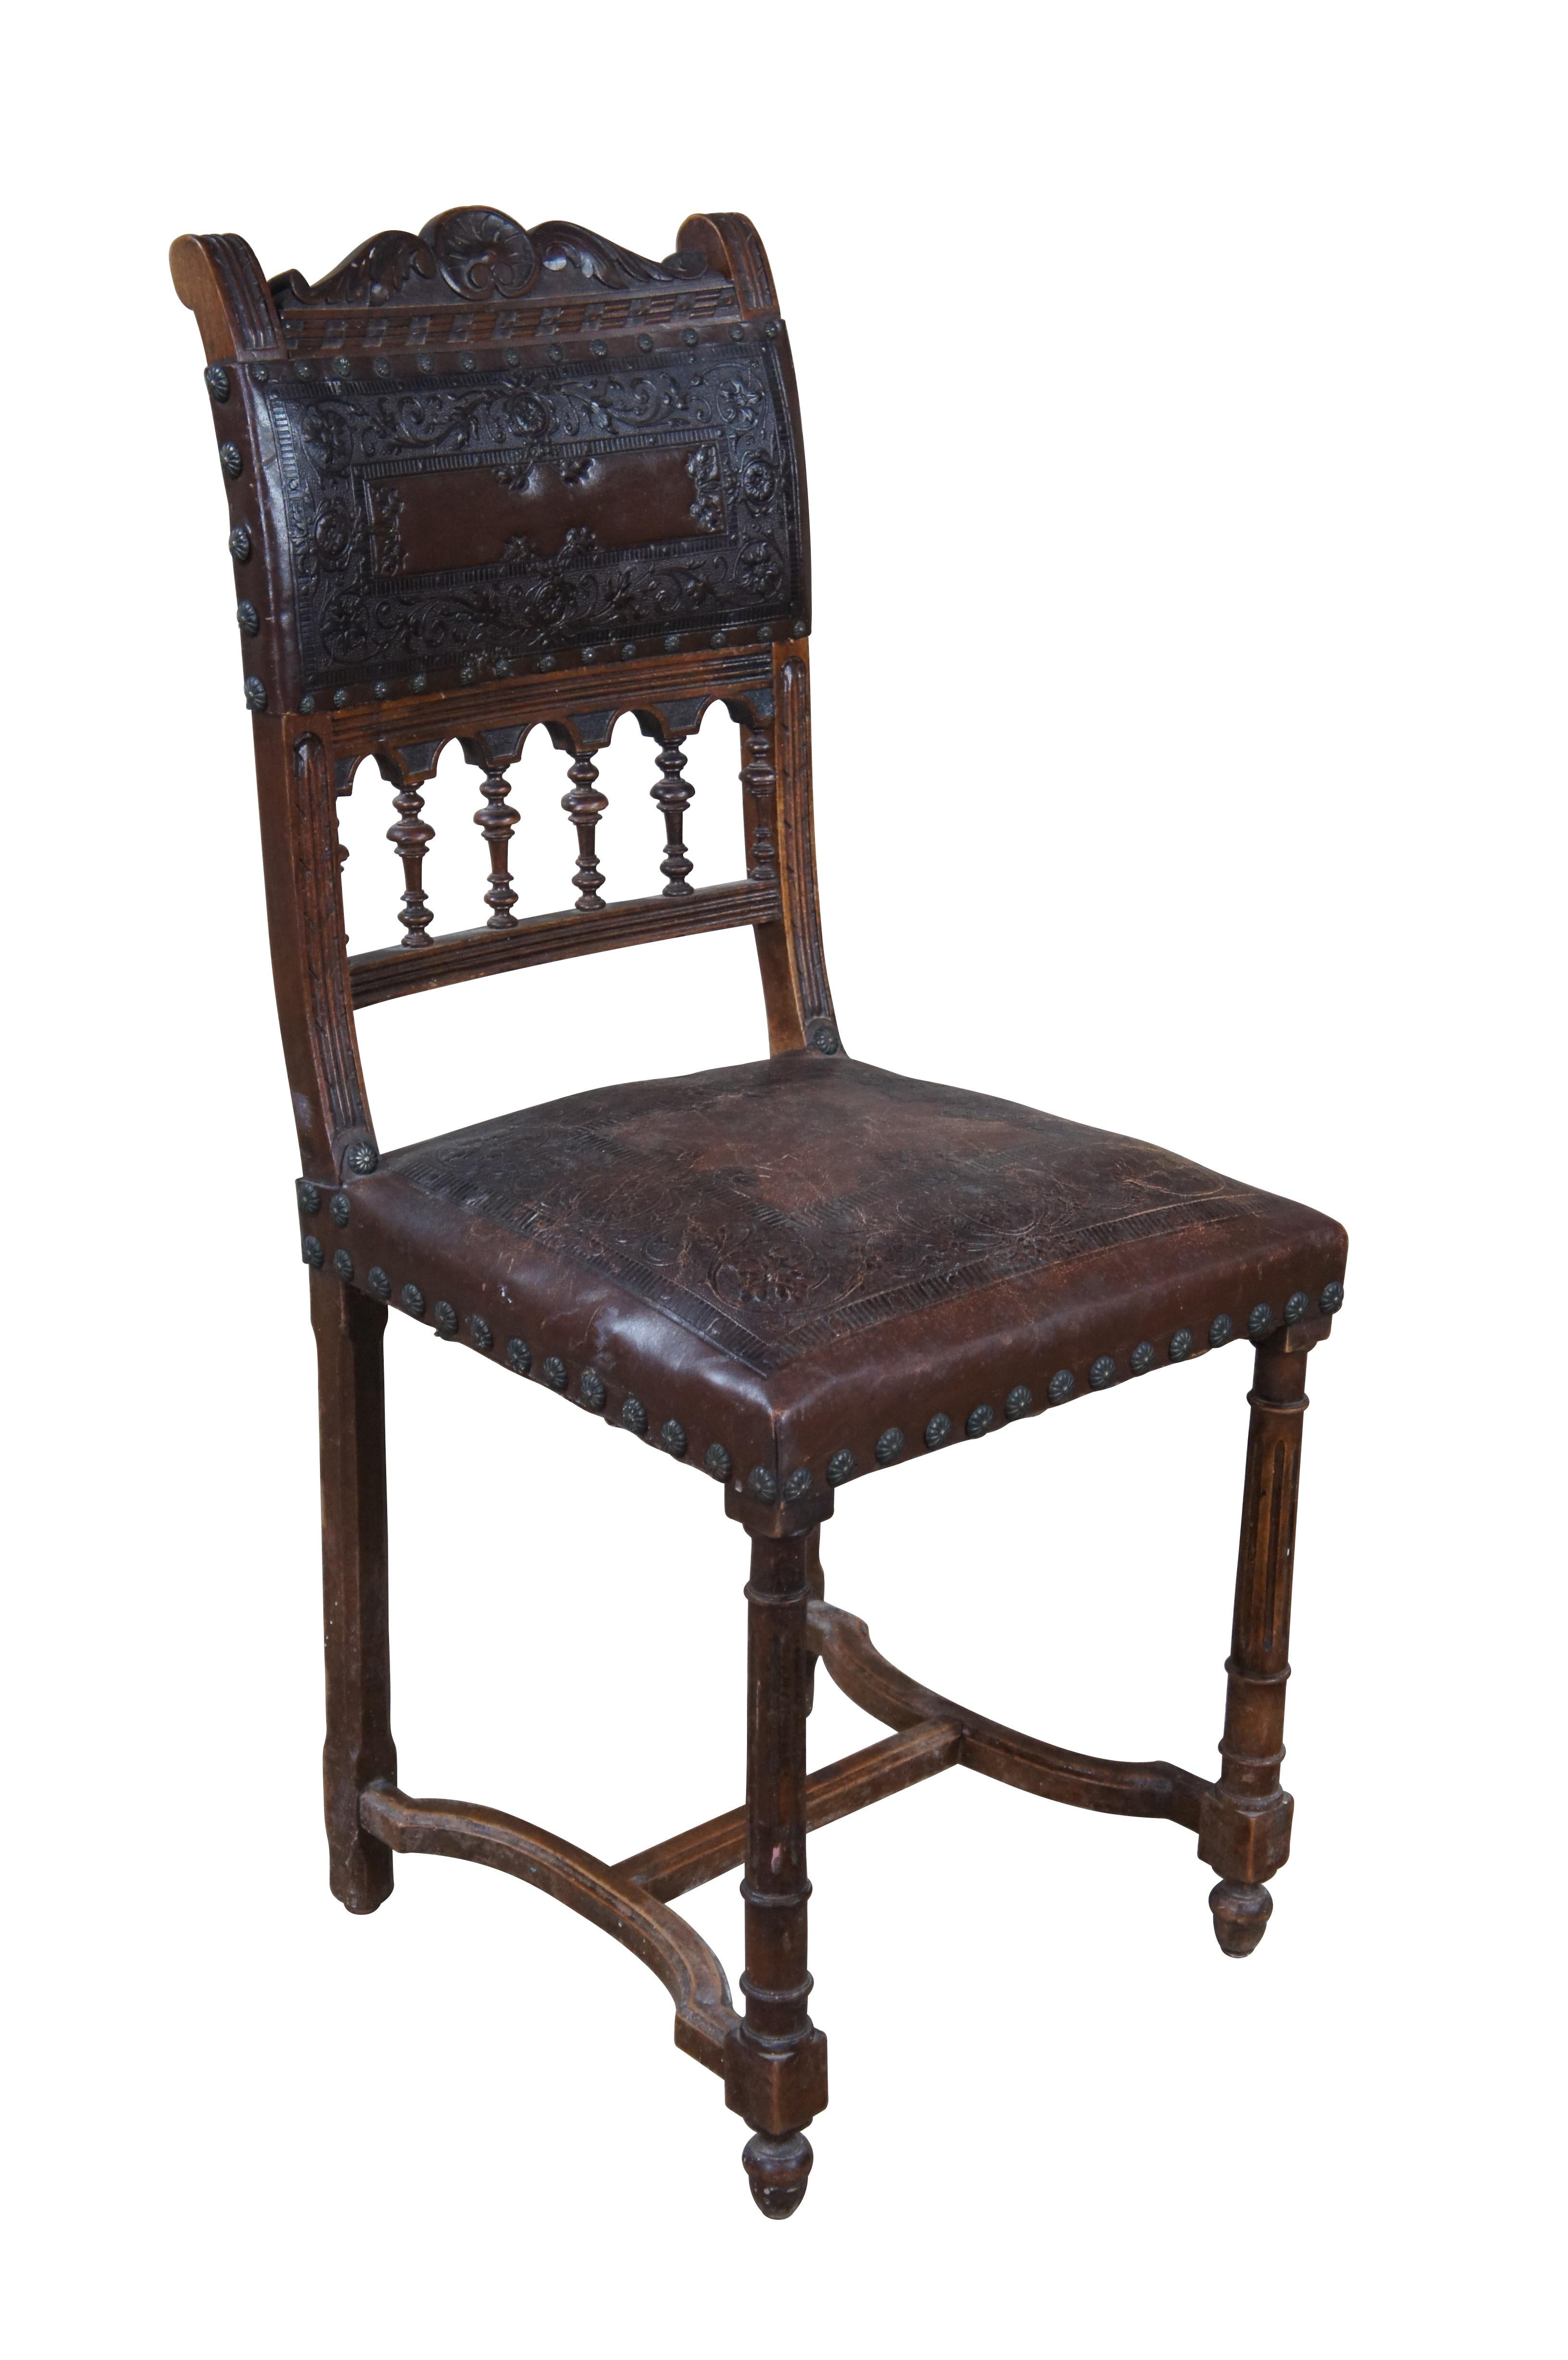 5 Antique French Henry II Style Embossed Leather & Oak Gothic Dining Side Chairs In Good Condition For Sale In Dayton, OH